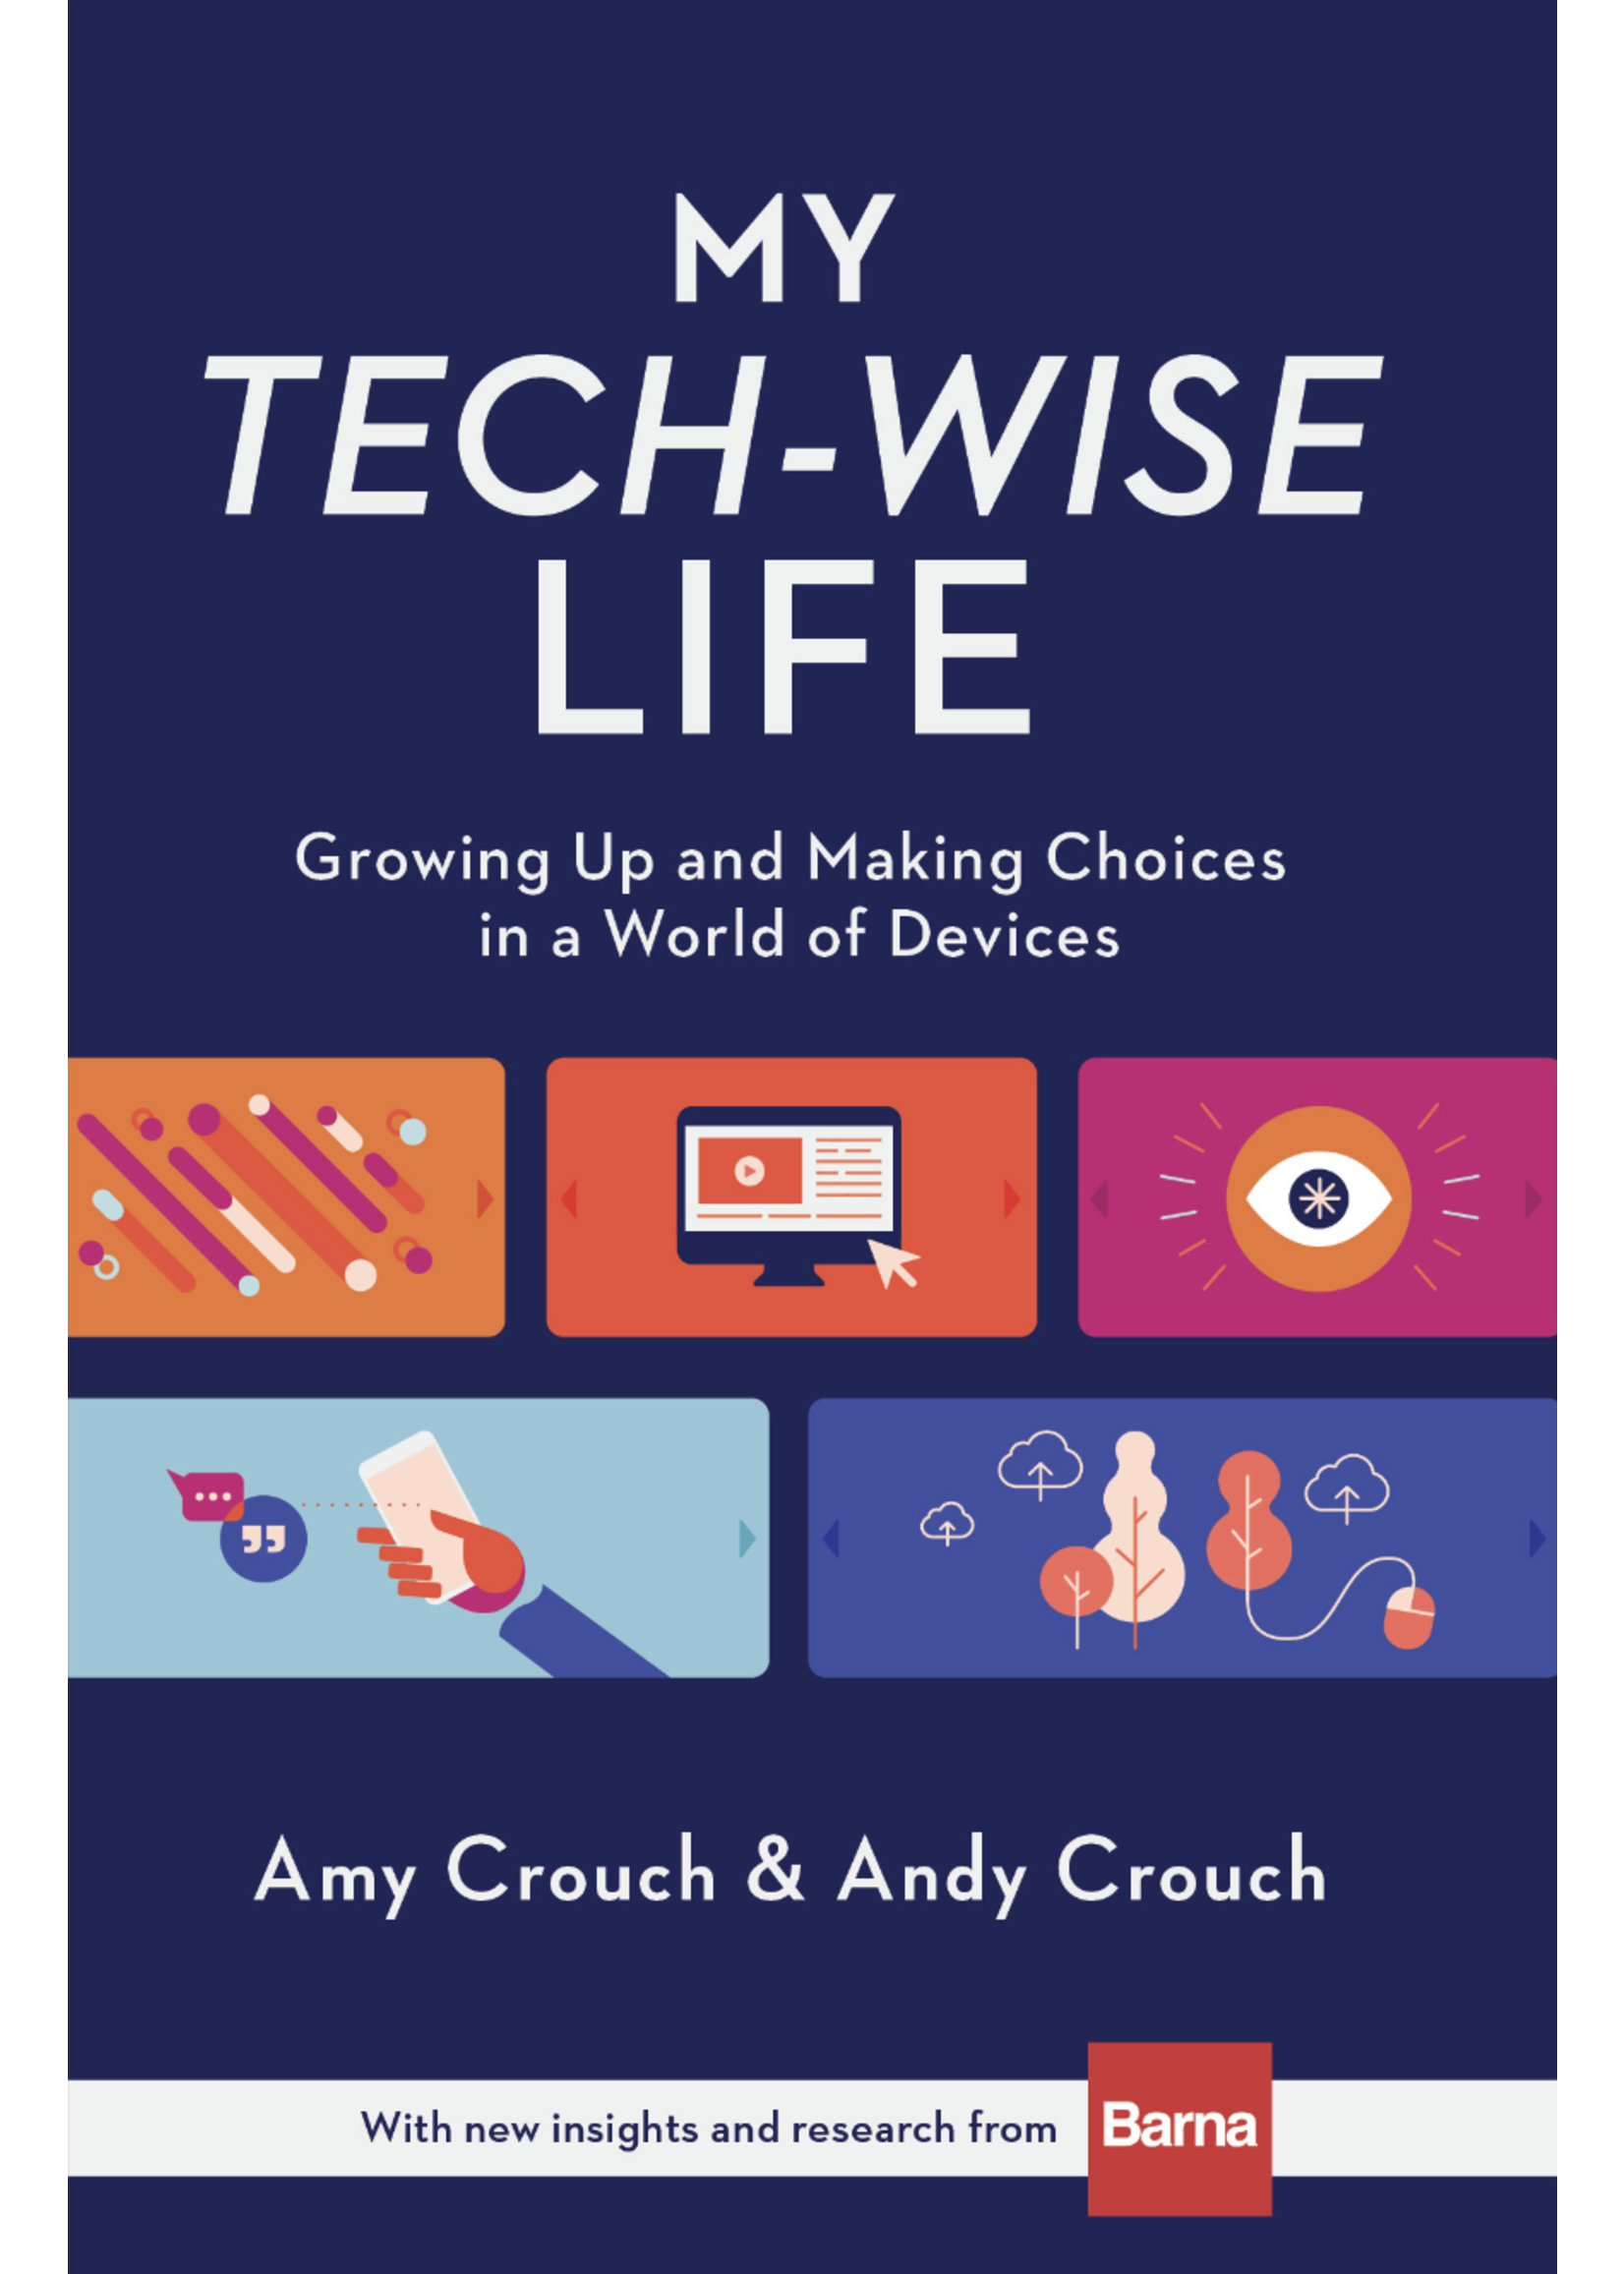 My Tech-Wise Life Growing Up and Making Choices in a World of Devices